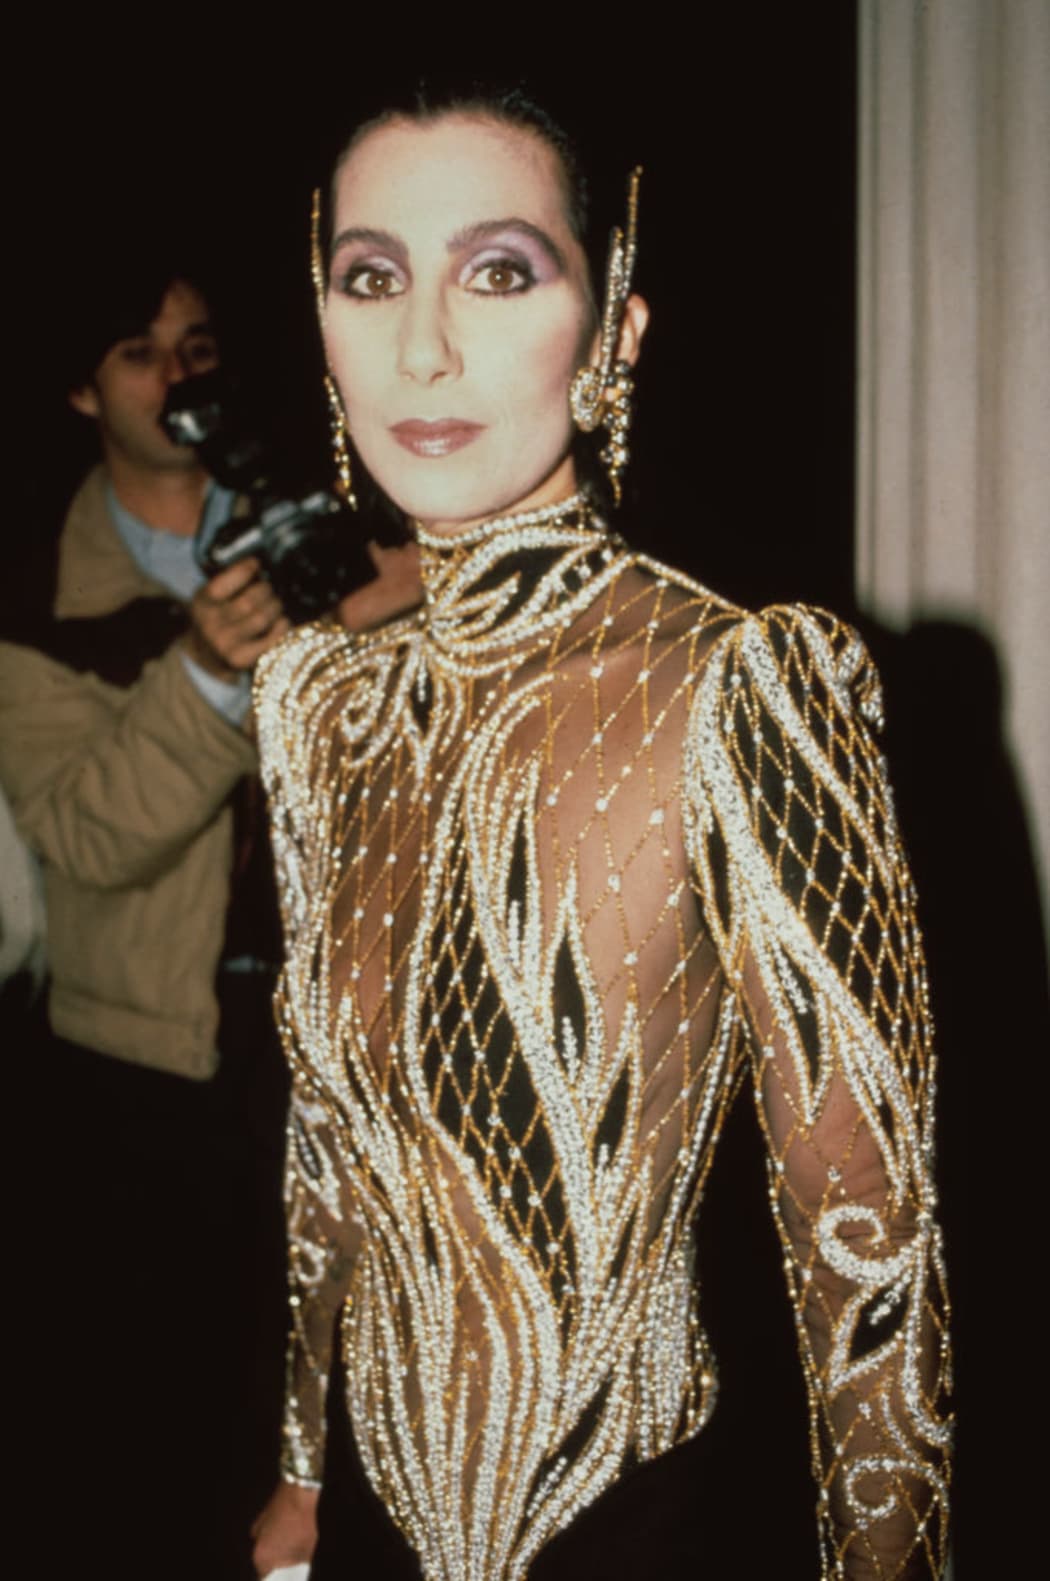 Cher wears a custom sequin black and sheer outfit by Bob Mackie at the Met Gala exhibition of "Costumes of Royal India" in New York City, United States, 9th December 1985.  (Photo by Vinnie Zuffante/Getty Images)